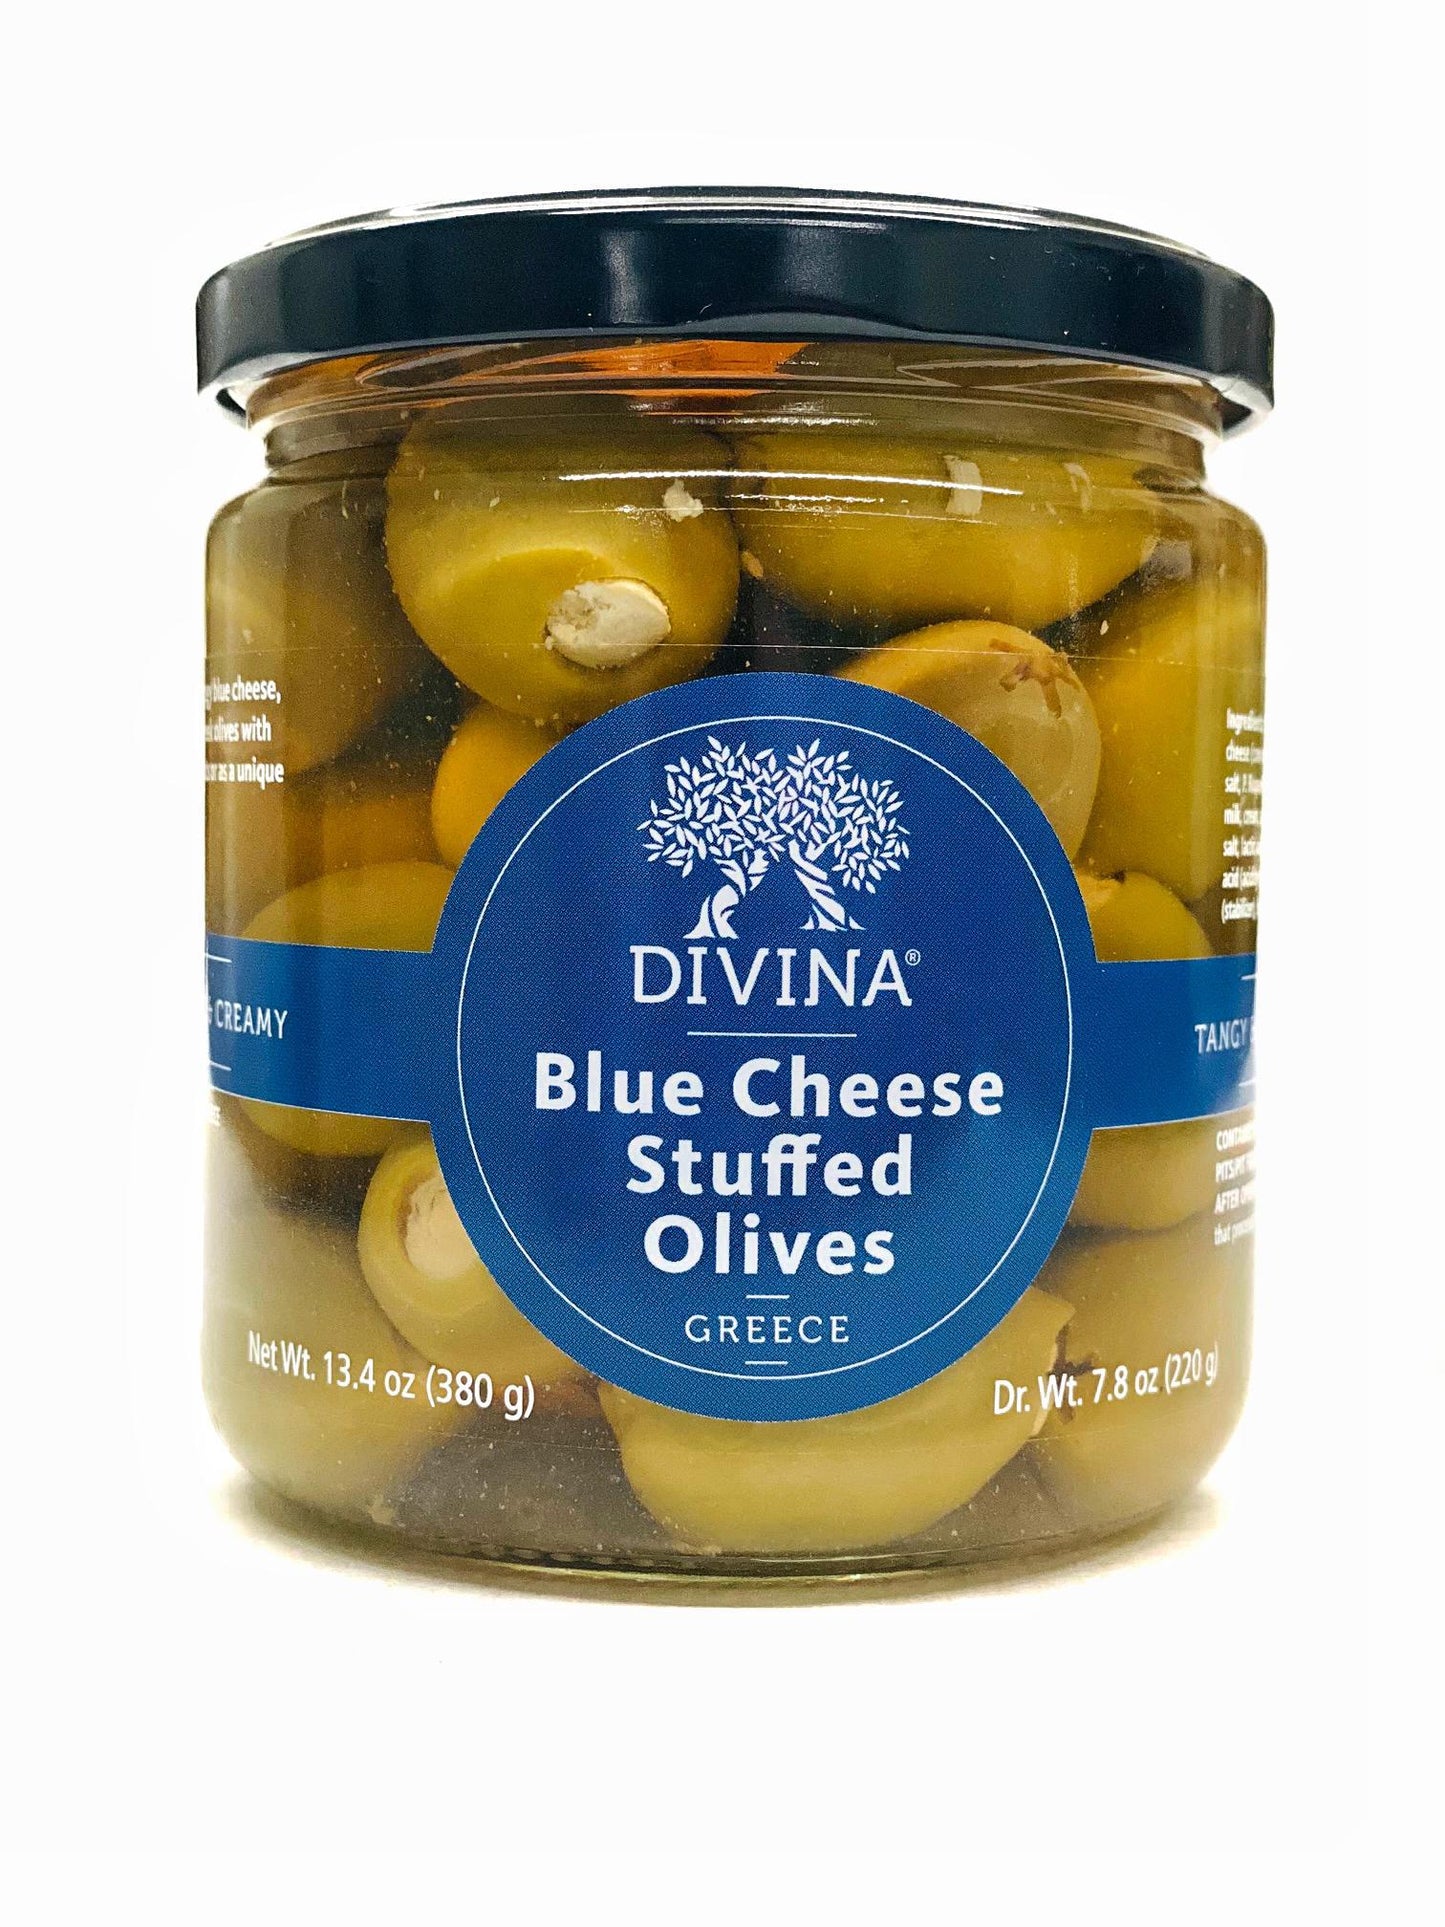 Divina Blue Cheese Stuffed Olives, 13.4 oz